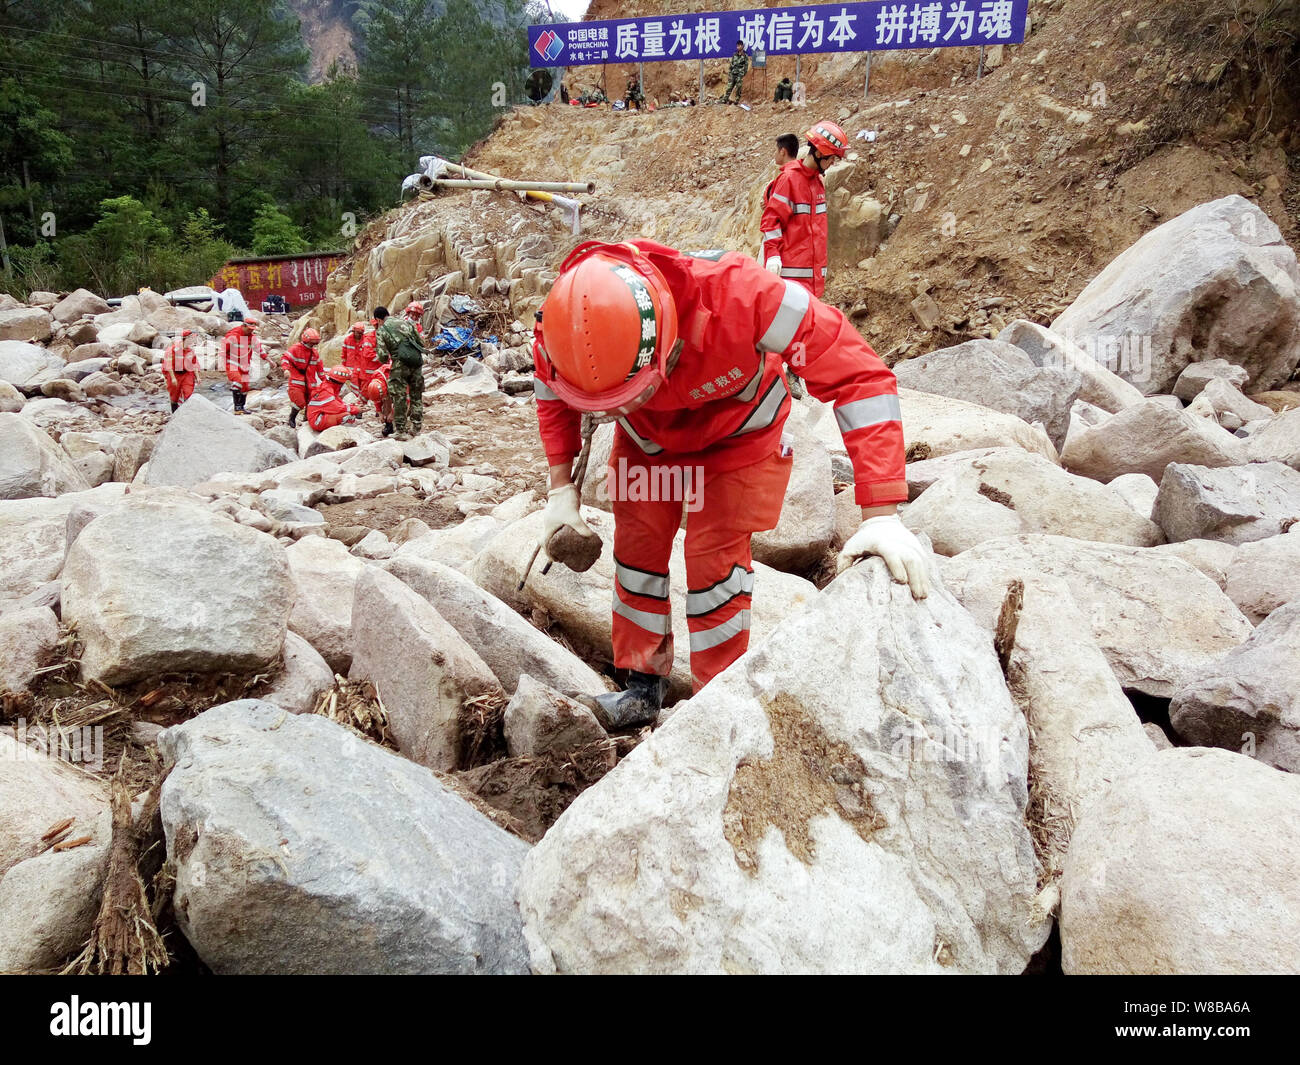 Chinese rescuers search for victims and survivors in debris of the massive landslide at a construction site in Chitan village, Taining county, Sanming Stock Photo